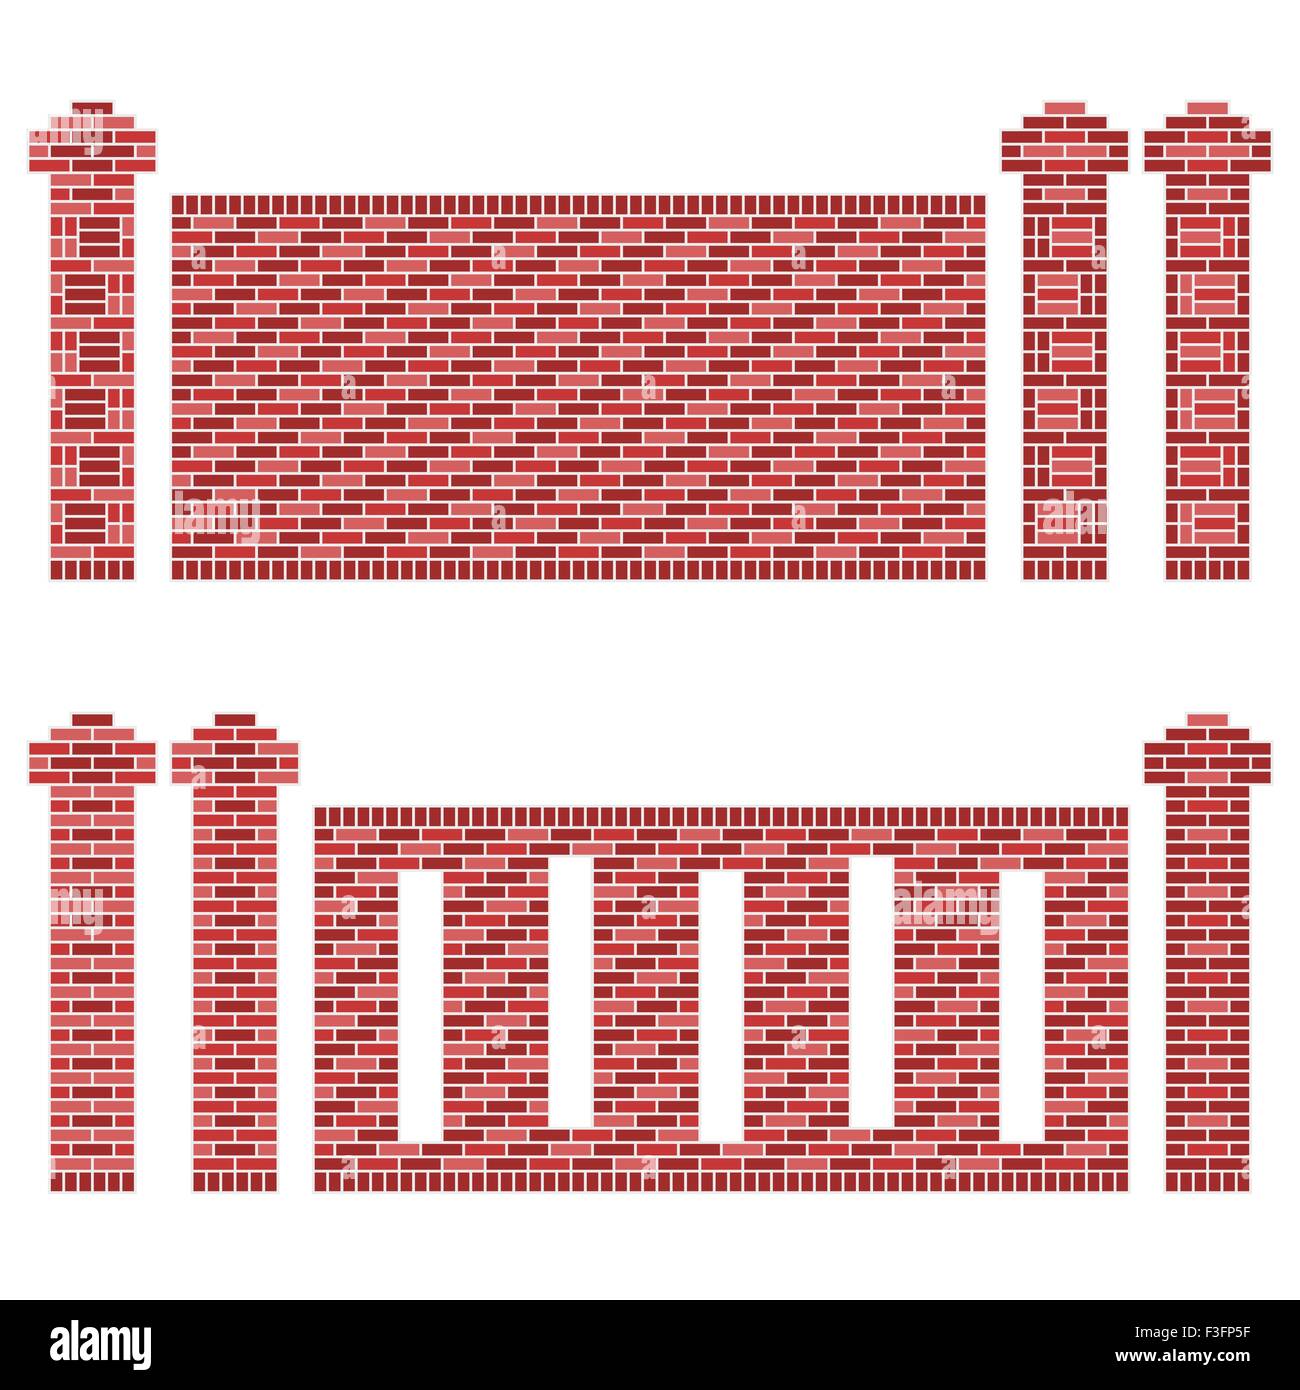 Few patterns of brick walls and its columns/pillars. The bricks are shades of maroon, red and brown. Isolated on white. Stock Vector